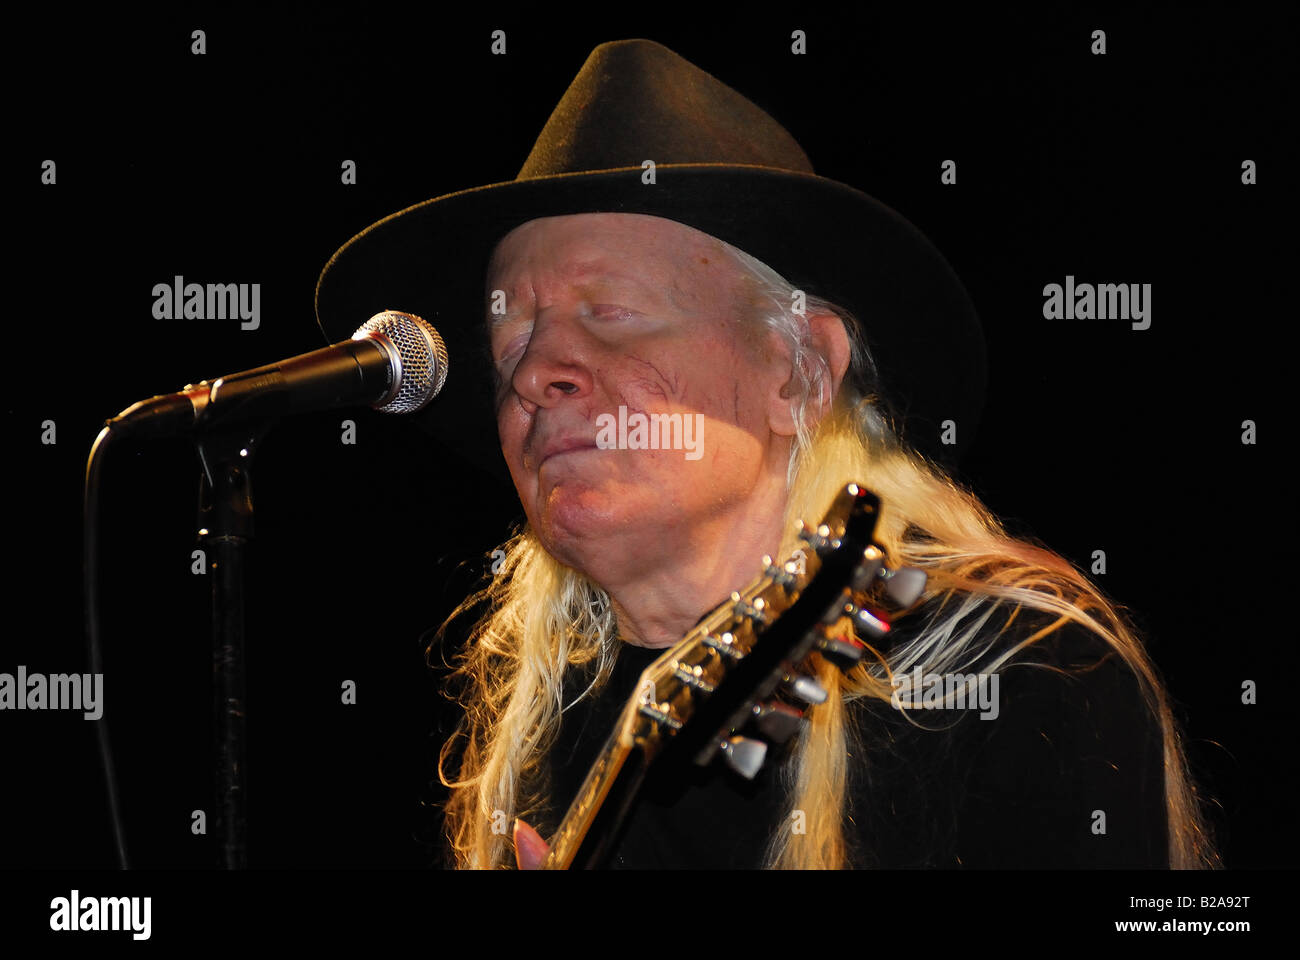 Johnny winter,the legend of the Texas blues Stock Photo